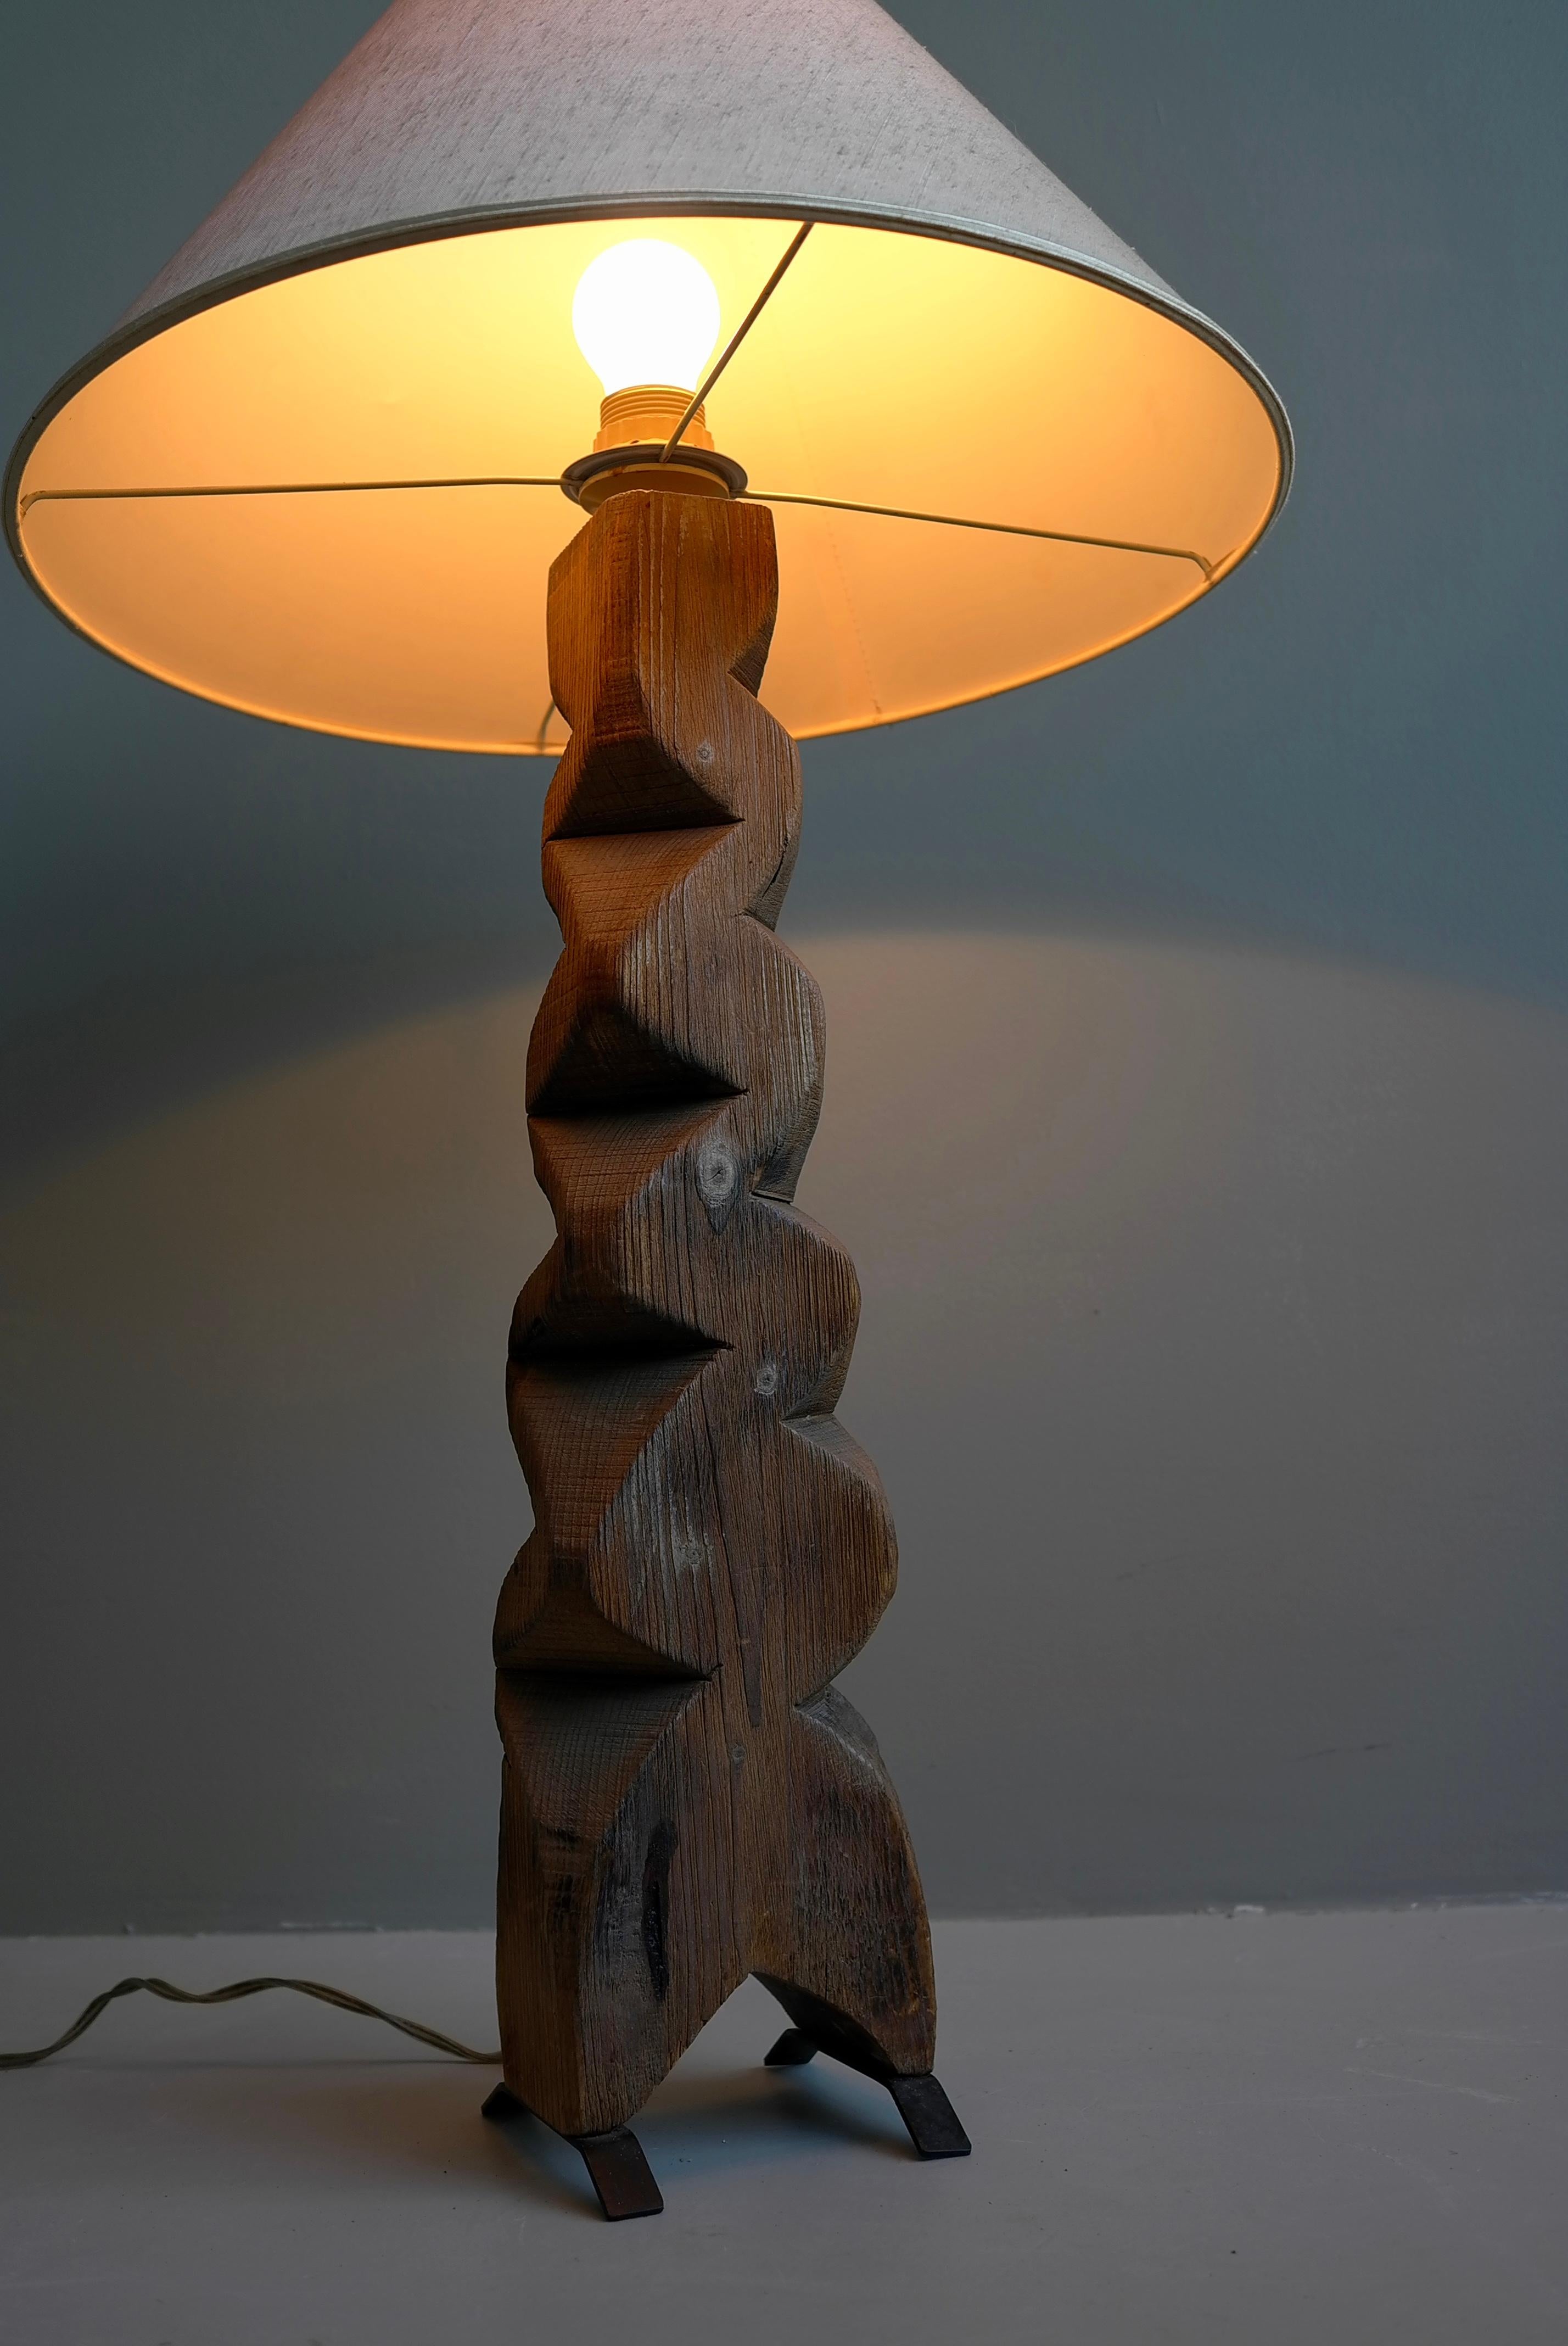 Large Mid-Century Modern Wooden Sculpture Table Lamp, off White Silk Shade, 1965 For Sale 2